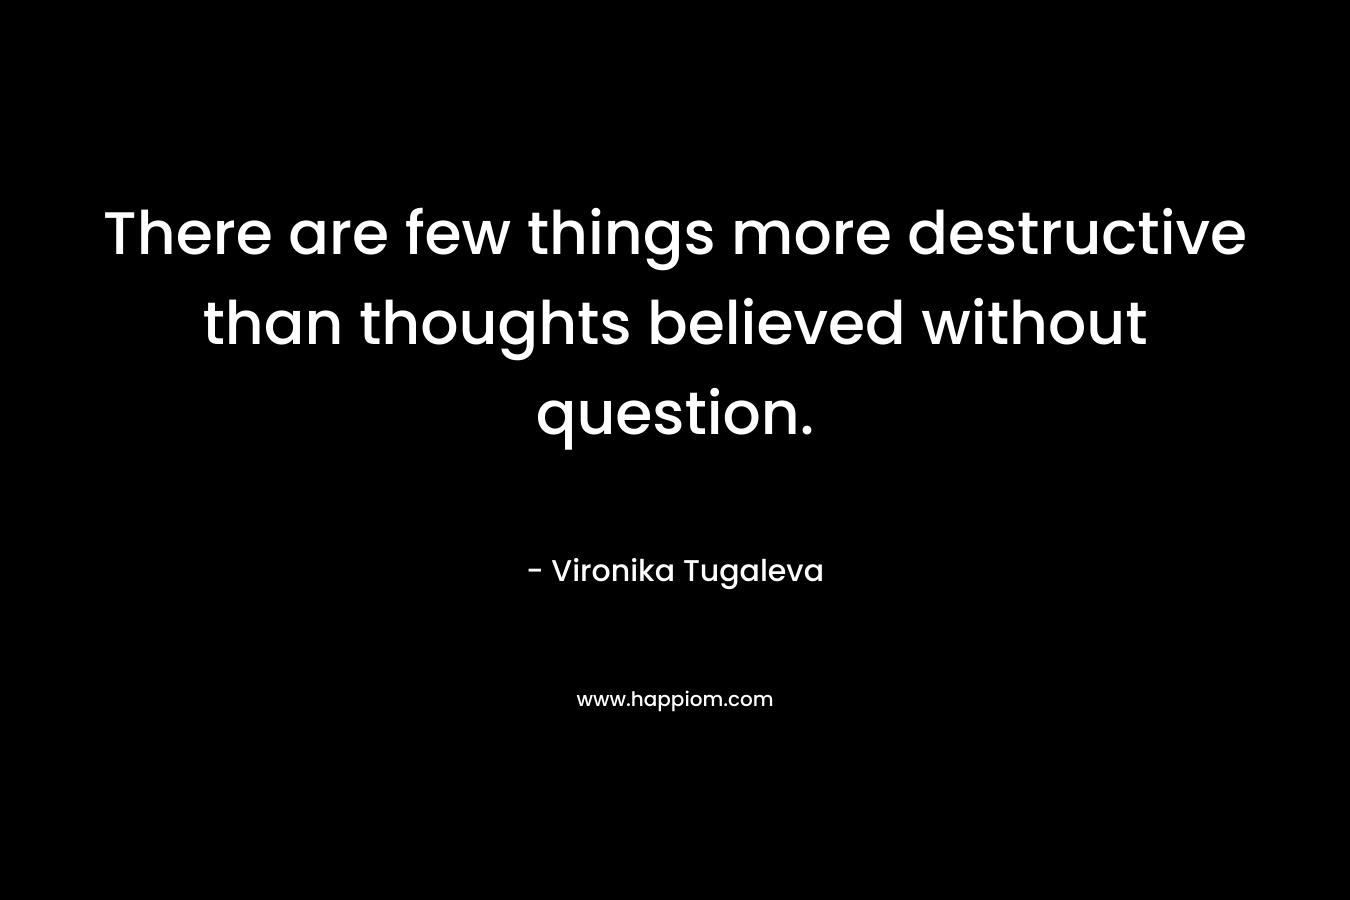 There are few things more destructive than thoughts believed without question.